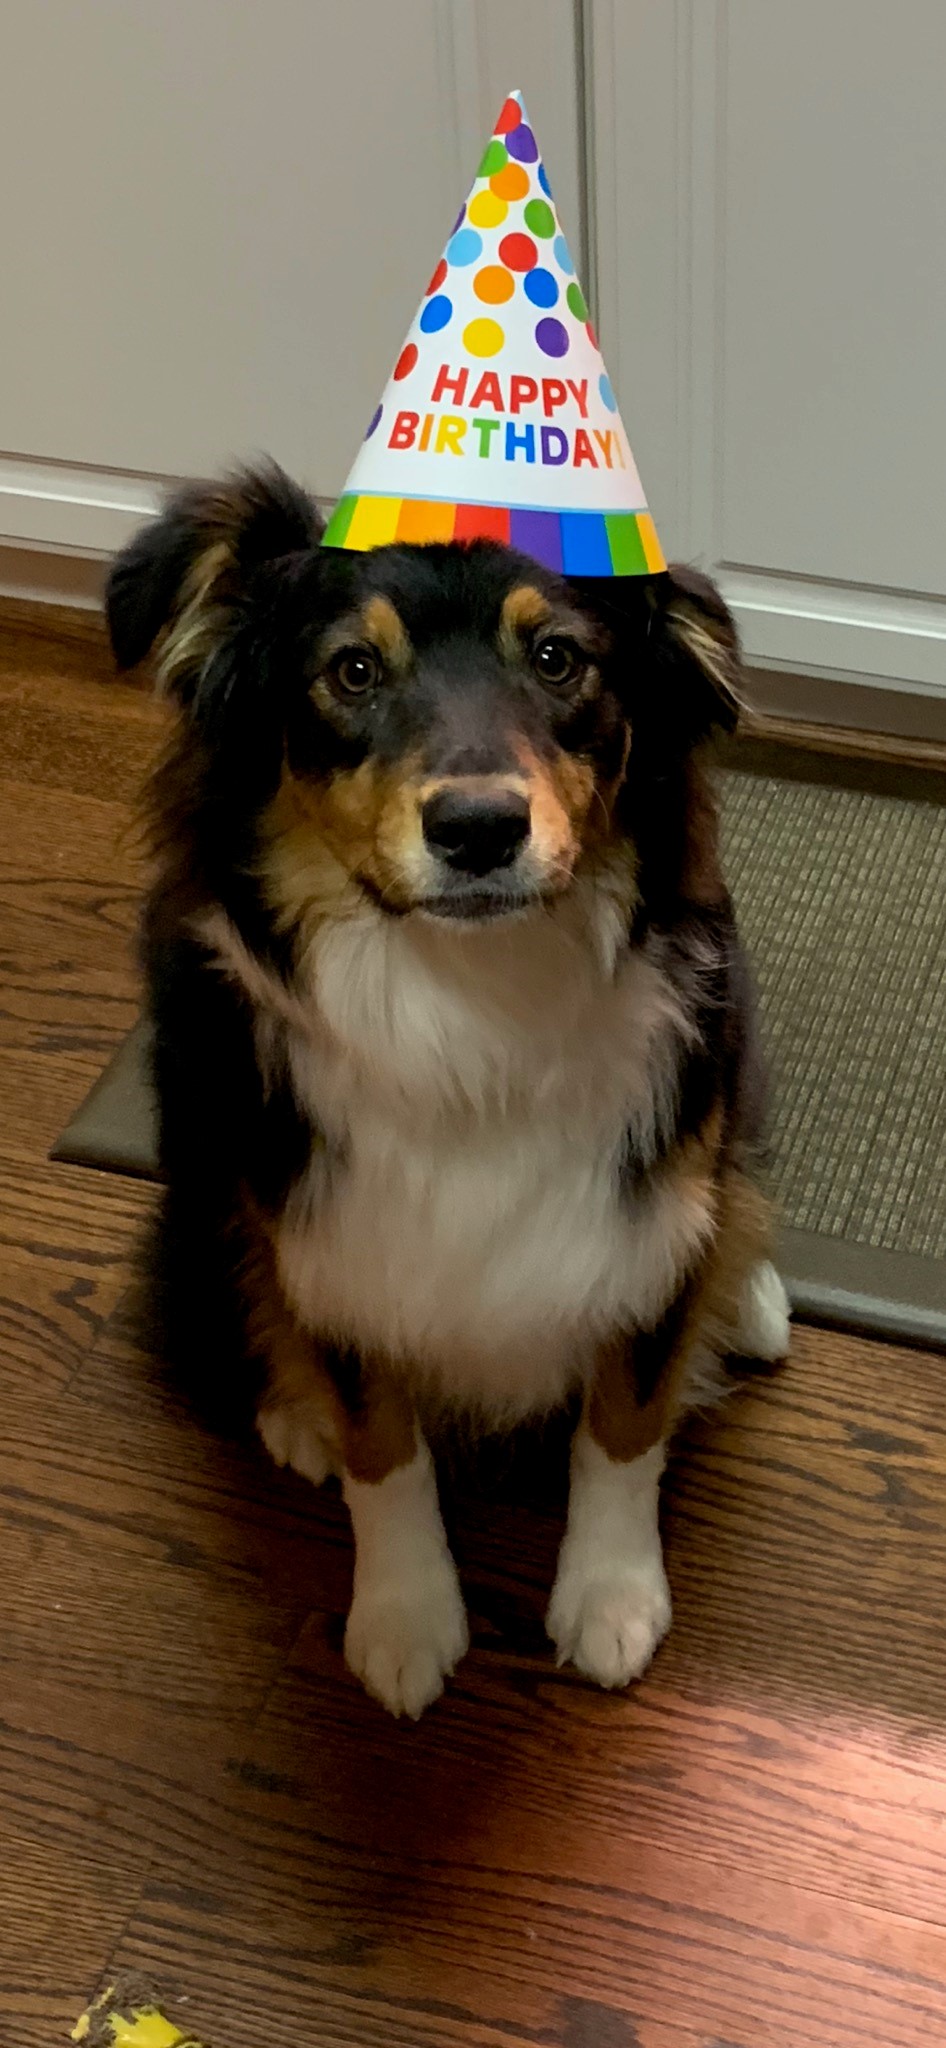 dog with a birthday hat on